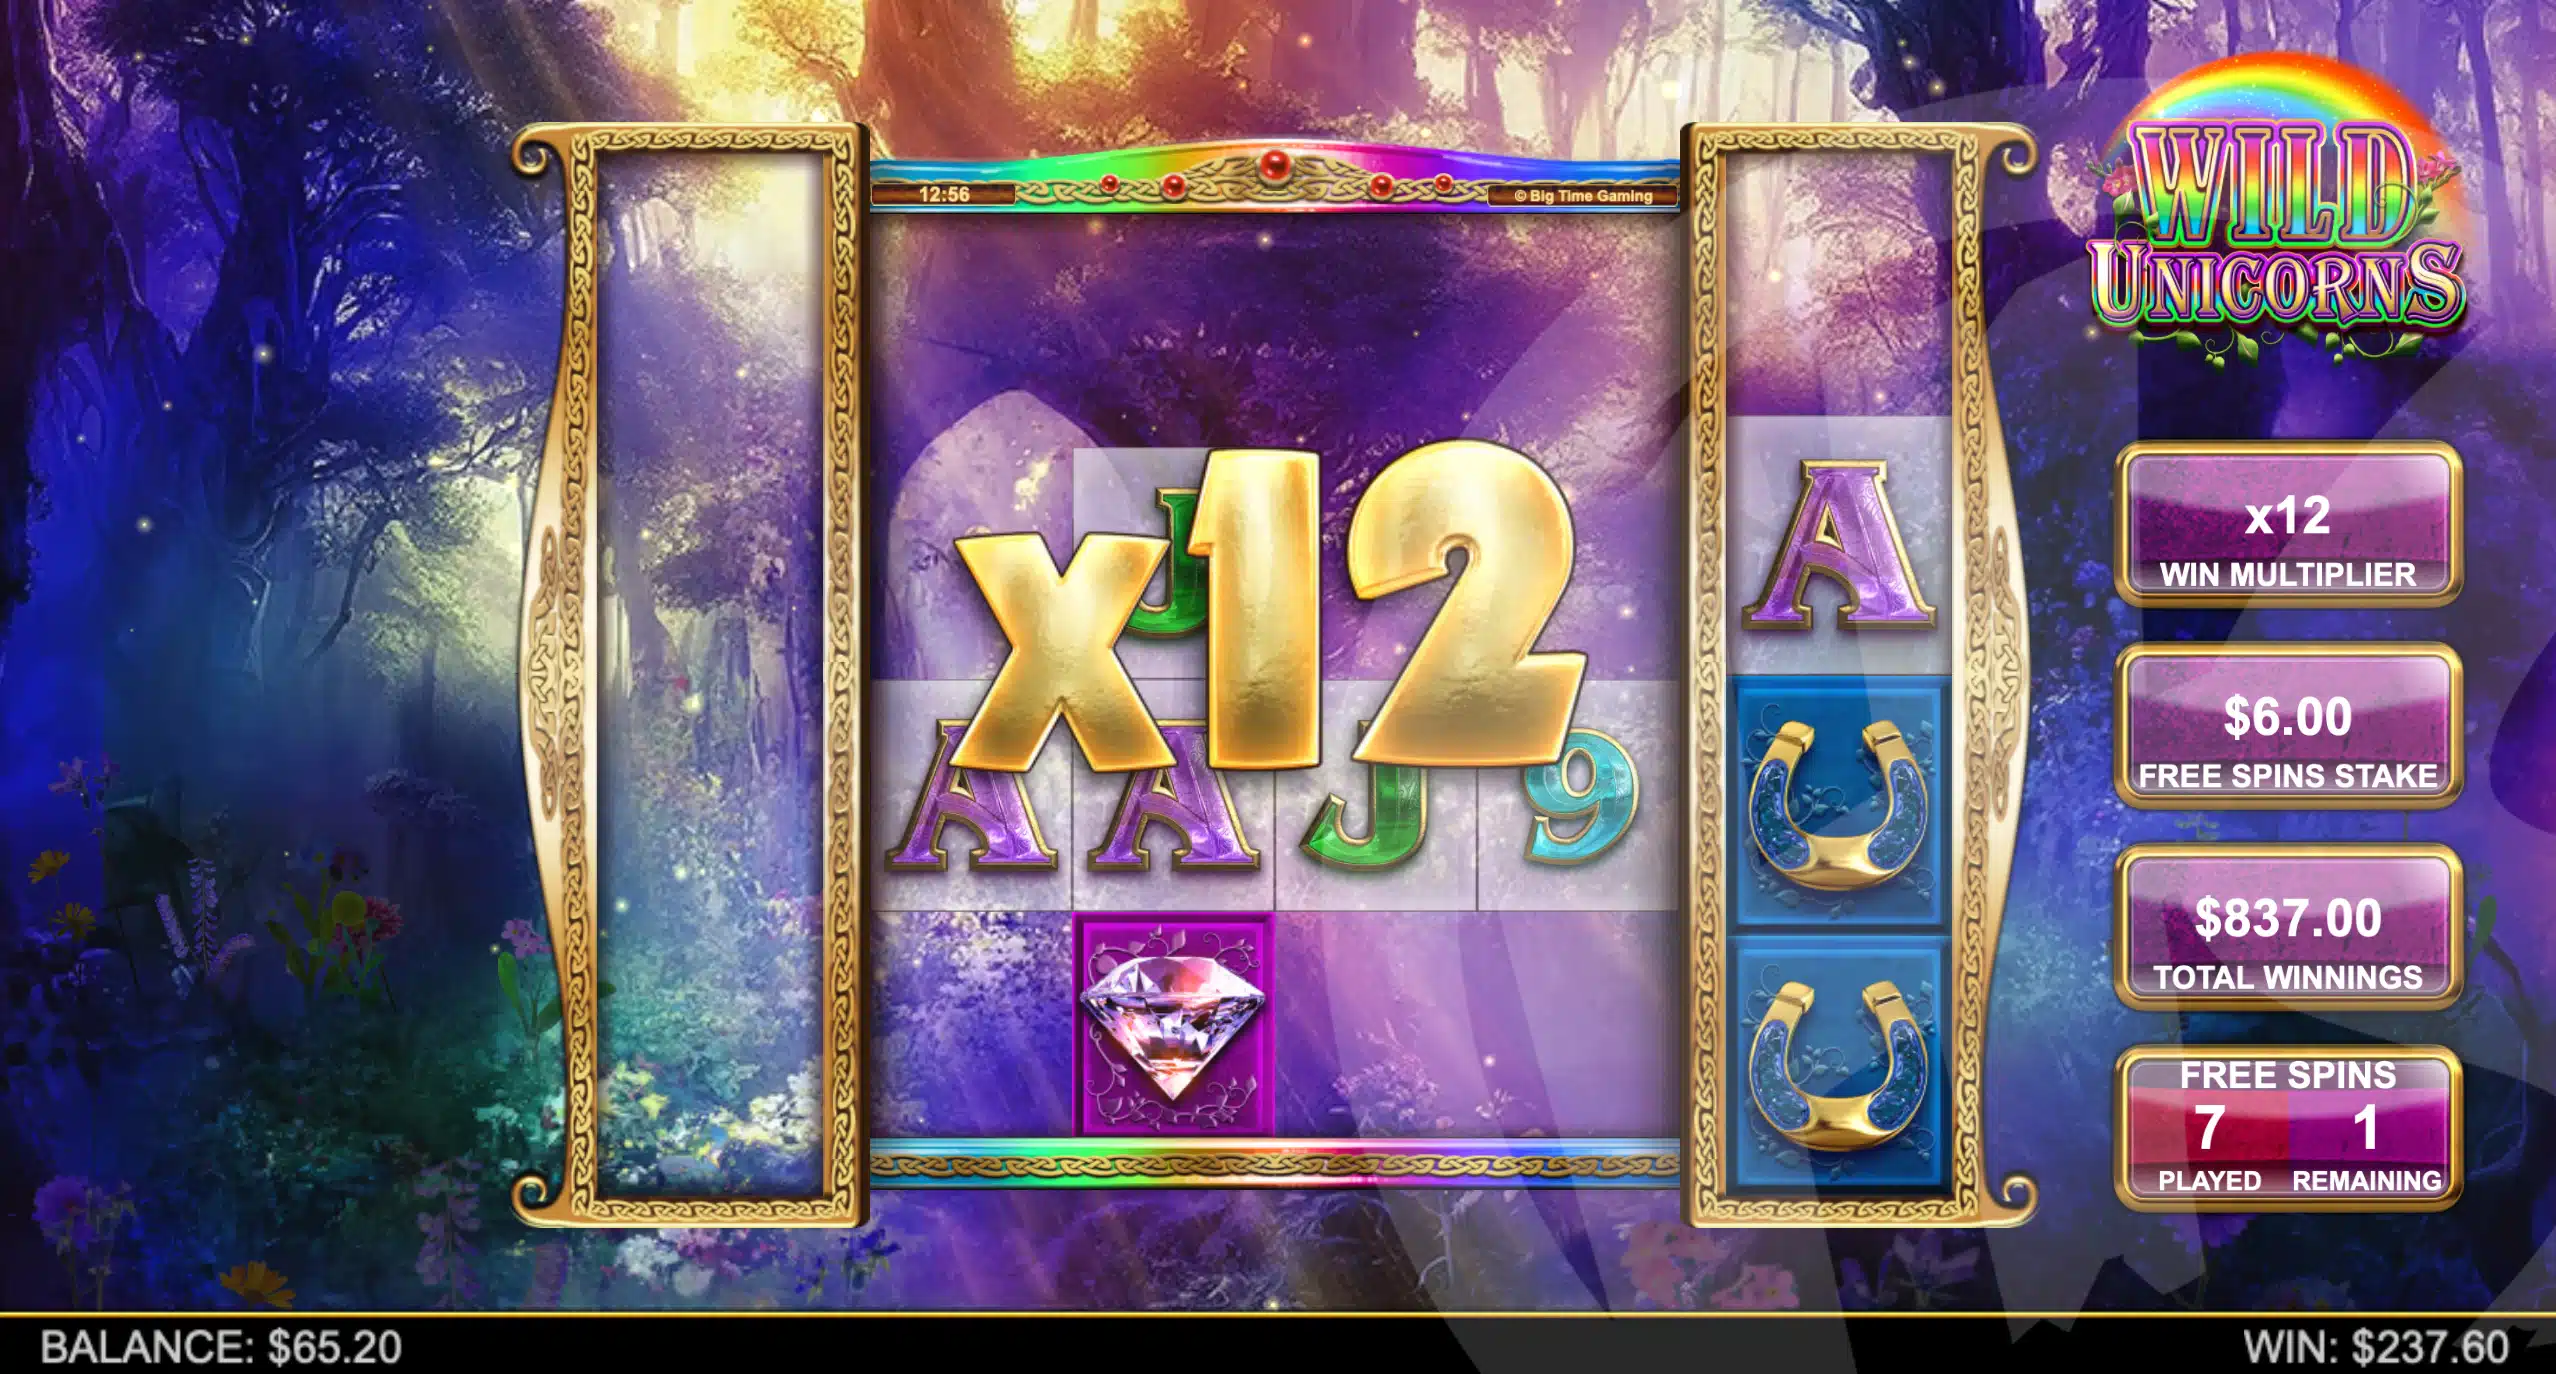 The Win Multiplier Increments By +1 For Each Winning Reaction During Free Spins